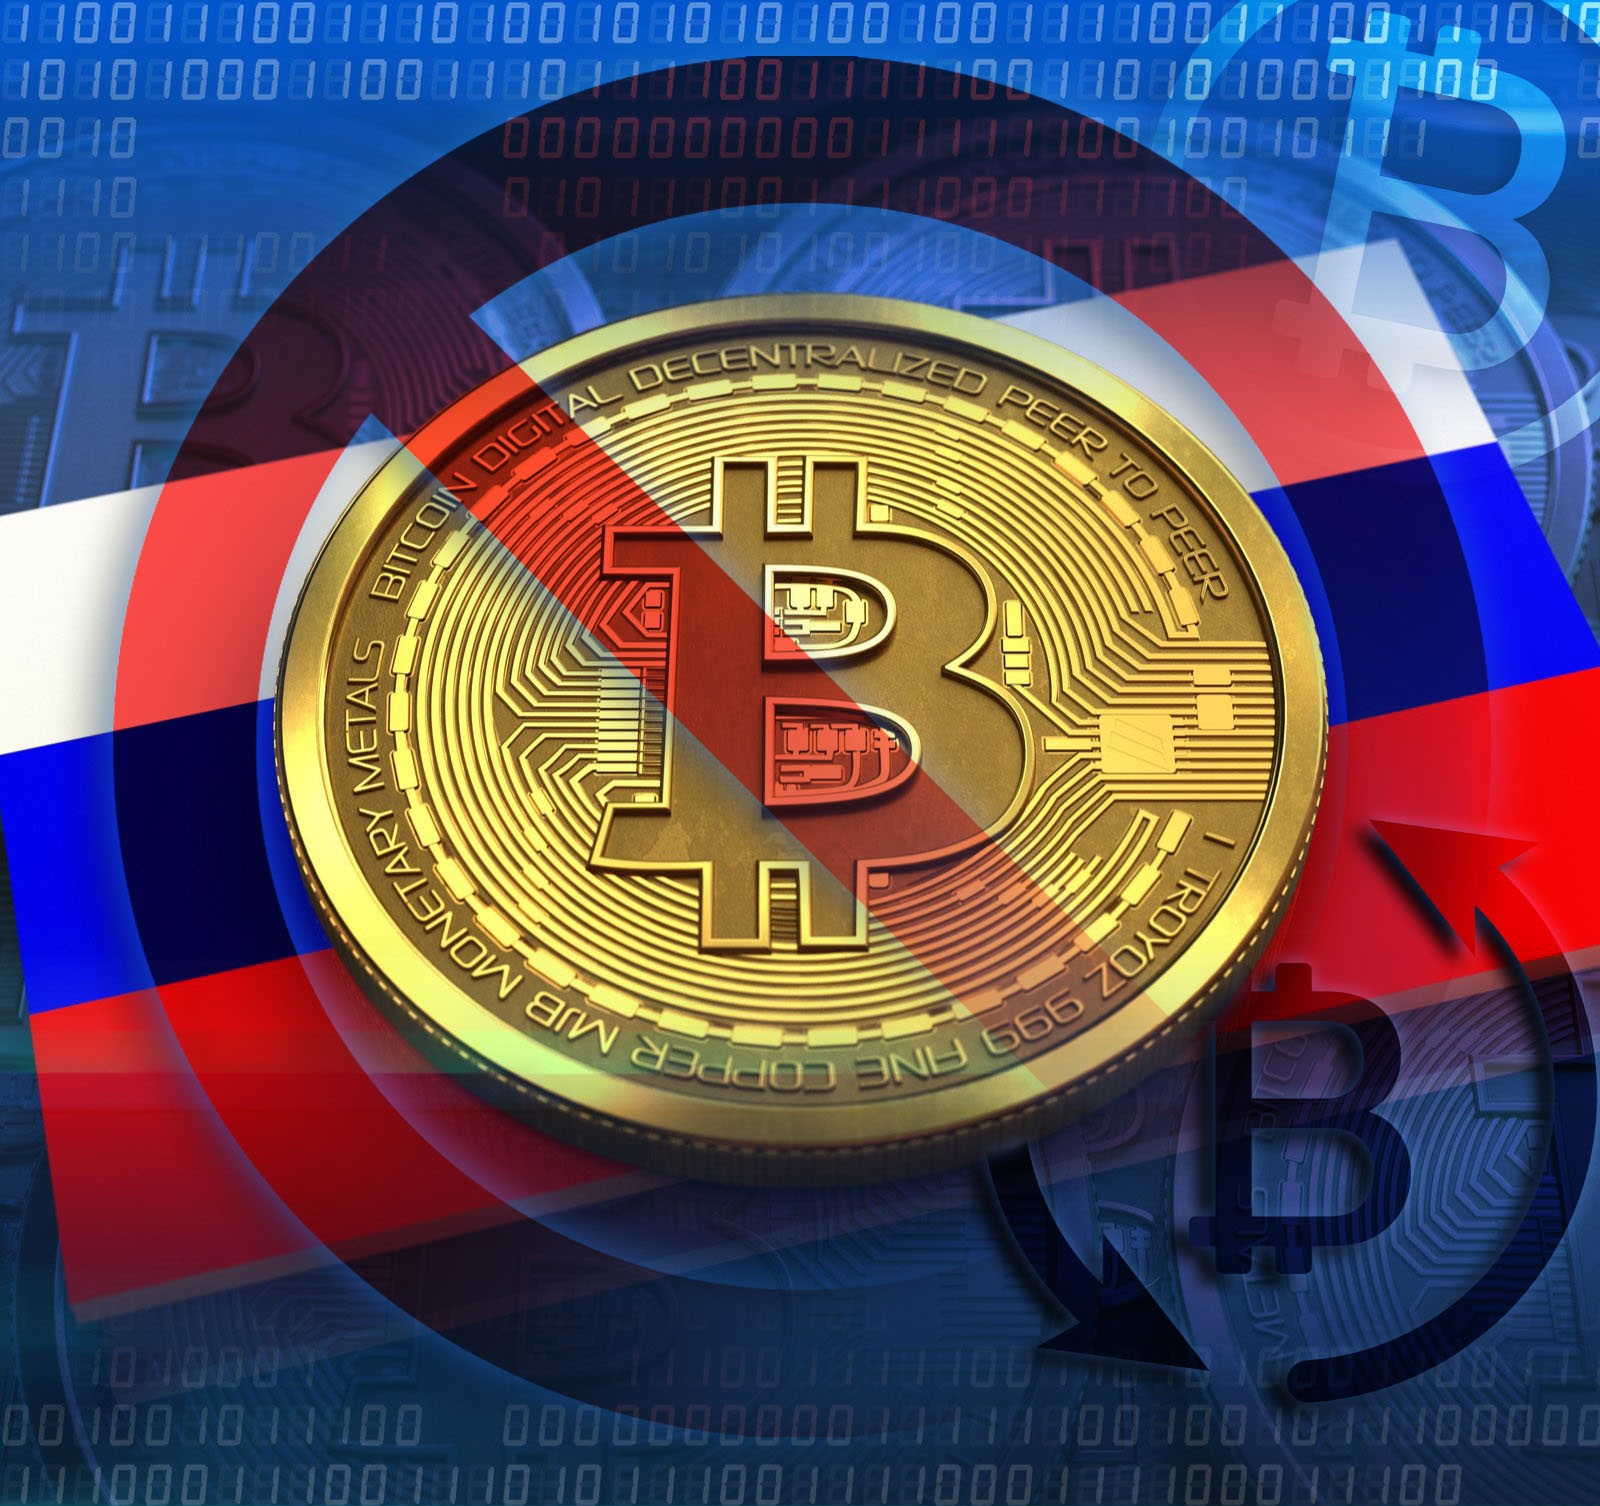 Central Bank of Russia: Ban all cryptocurrencies now